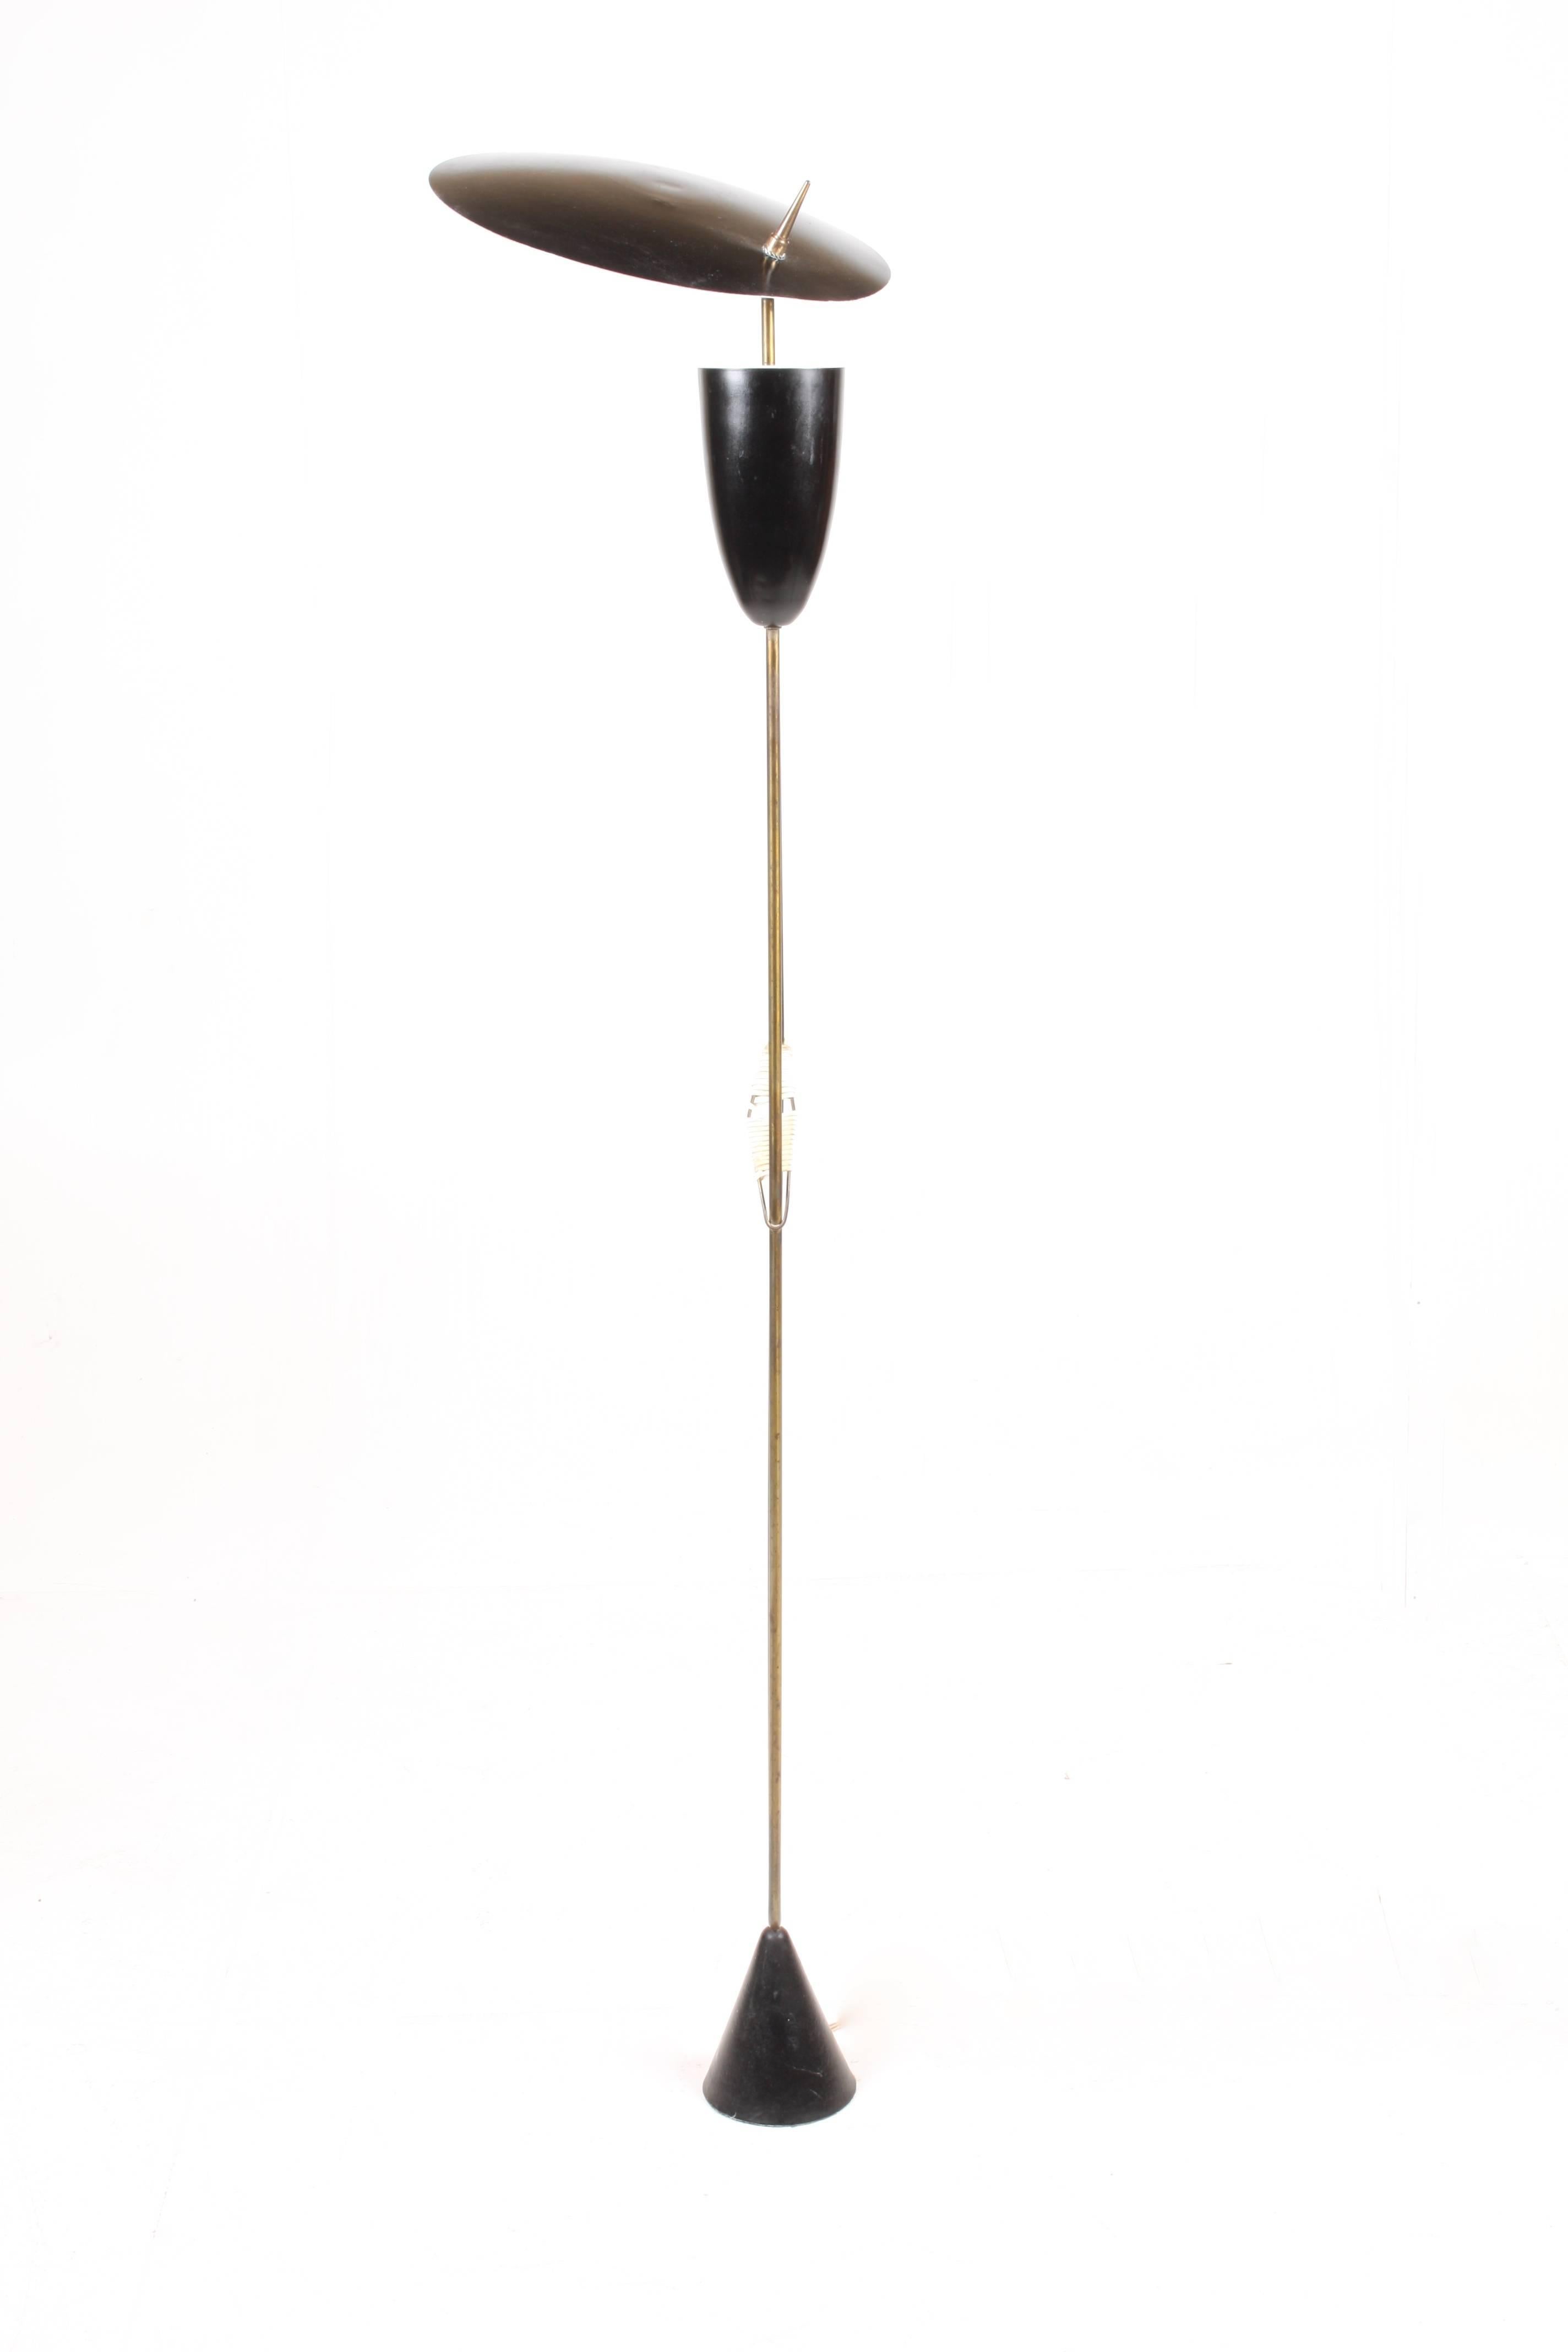 Rare and unique looking floor lamp in brass and black painted metal designed by S.A. Holm sørensen in the 1950´s. Made in Denmark. Great condition.